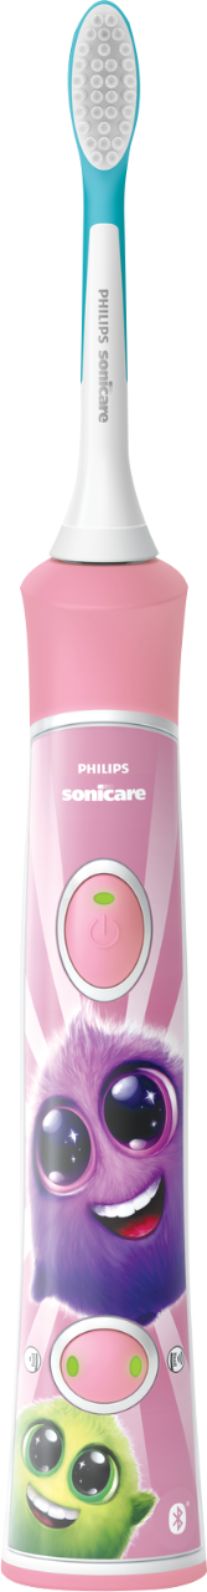 Angle View: Philips Sonicare - Sonicare For Kids Rechargeable Toothbrush - Pink/White